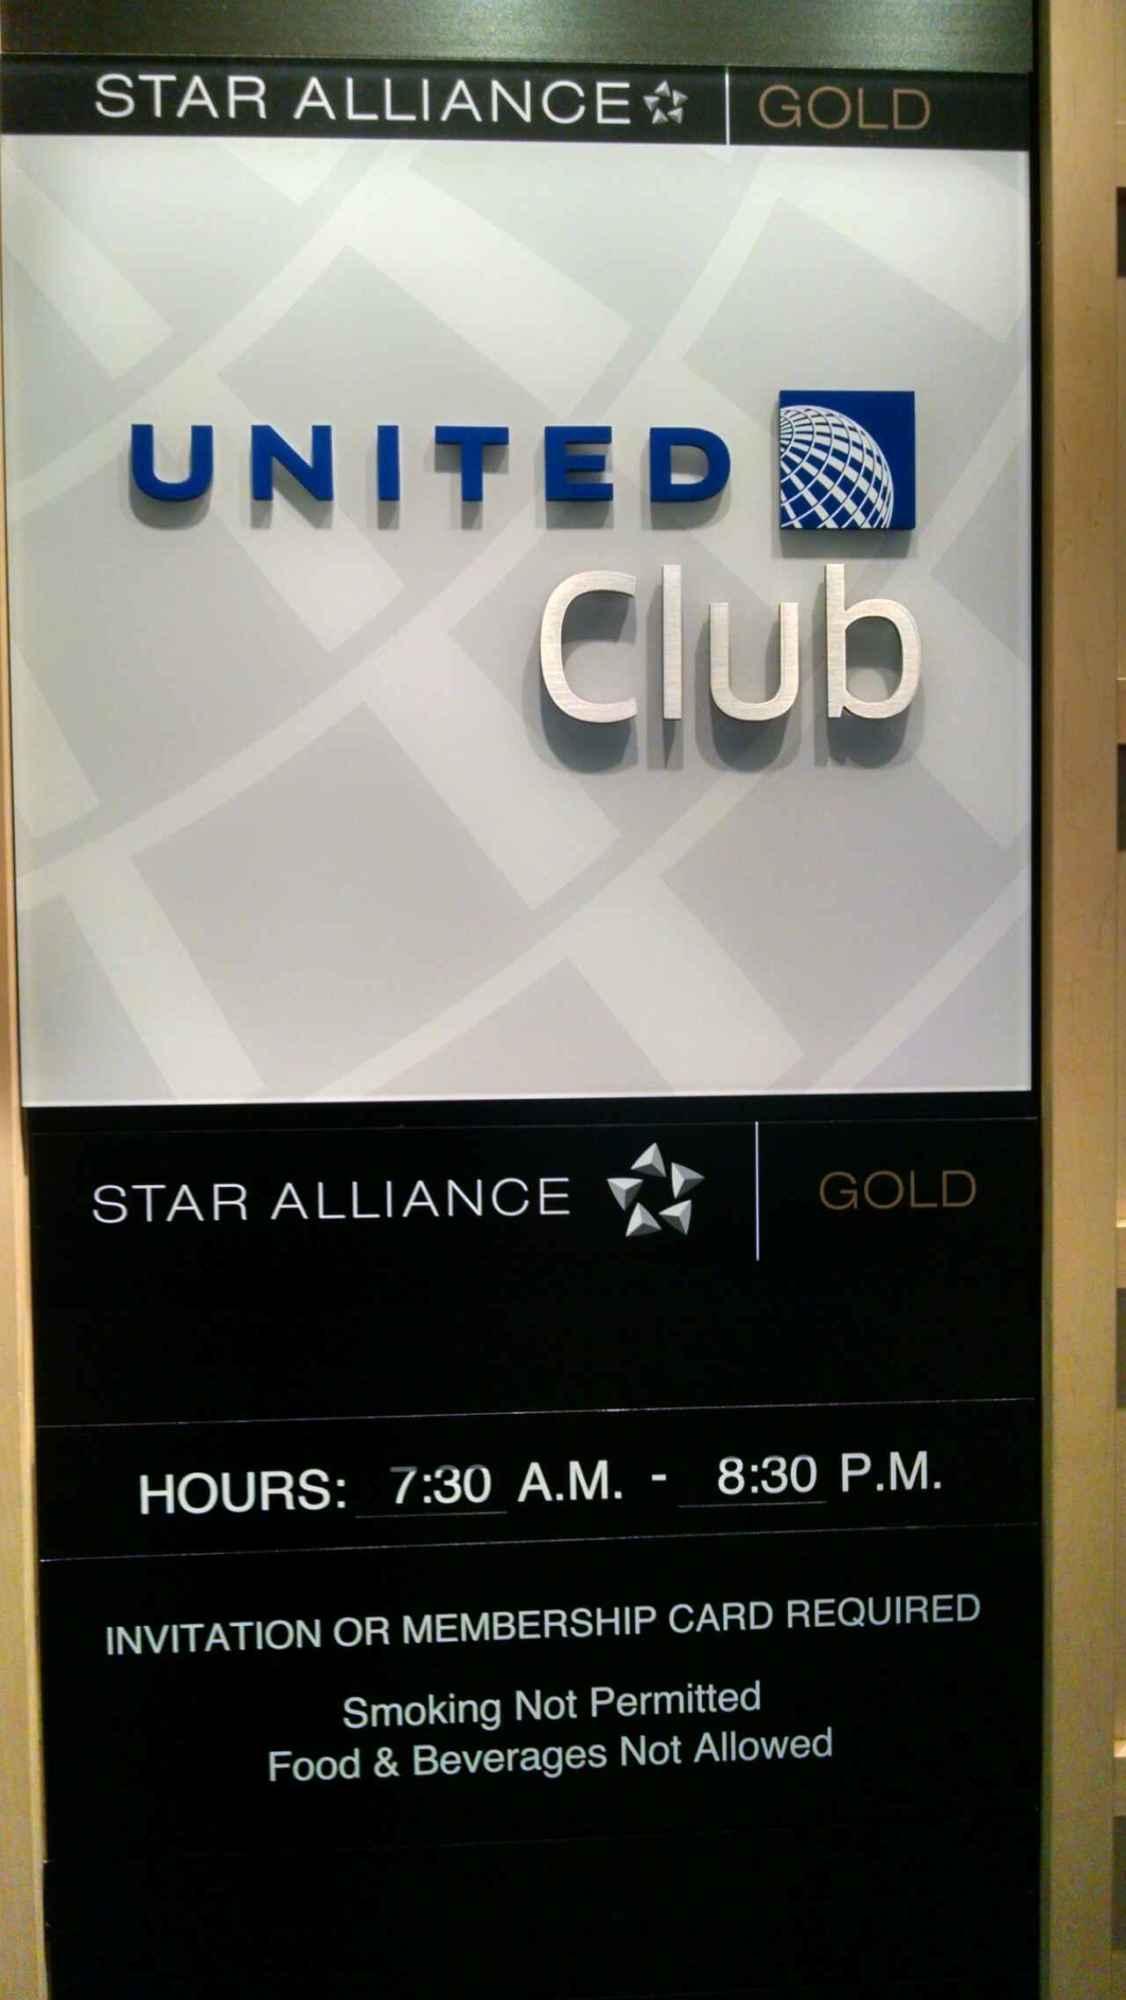 United Airlines United Club image 16 of 52